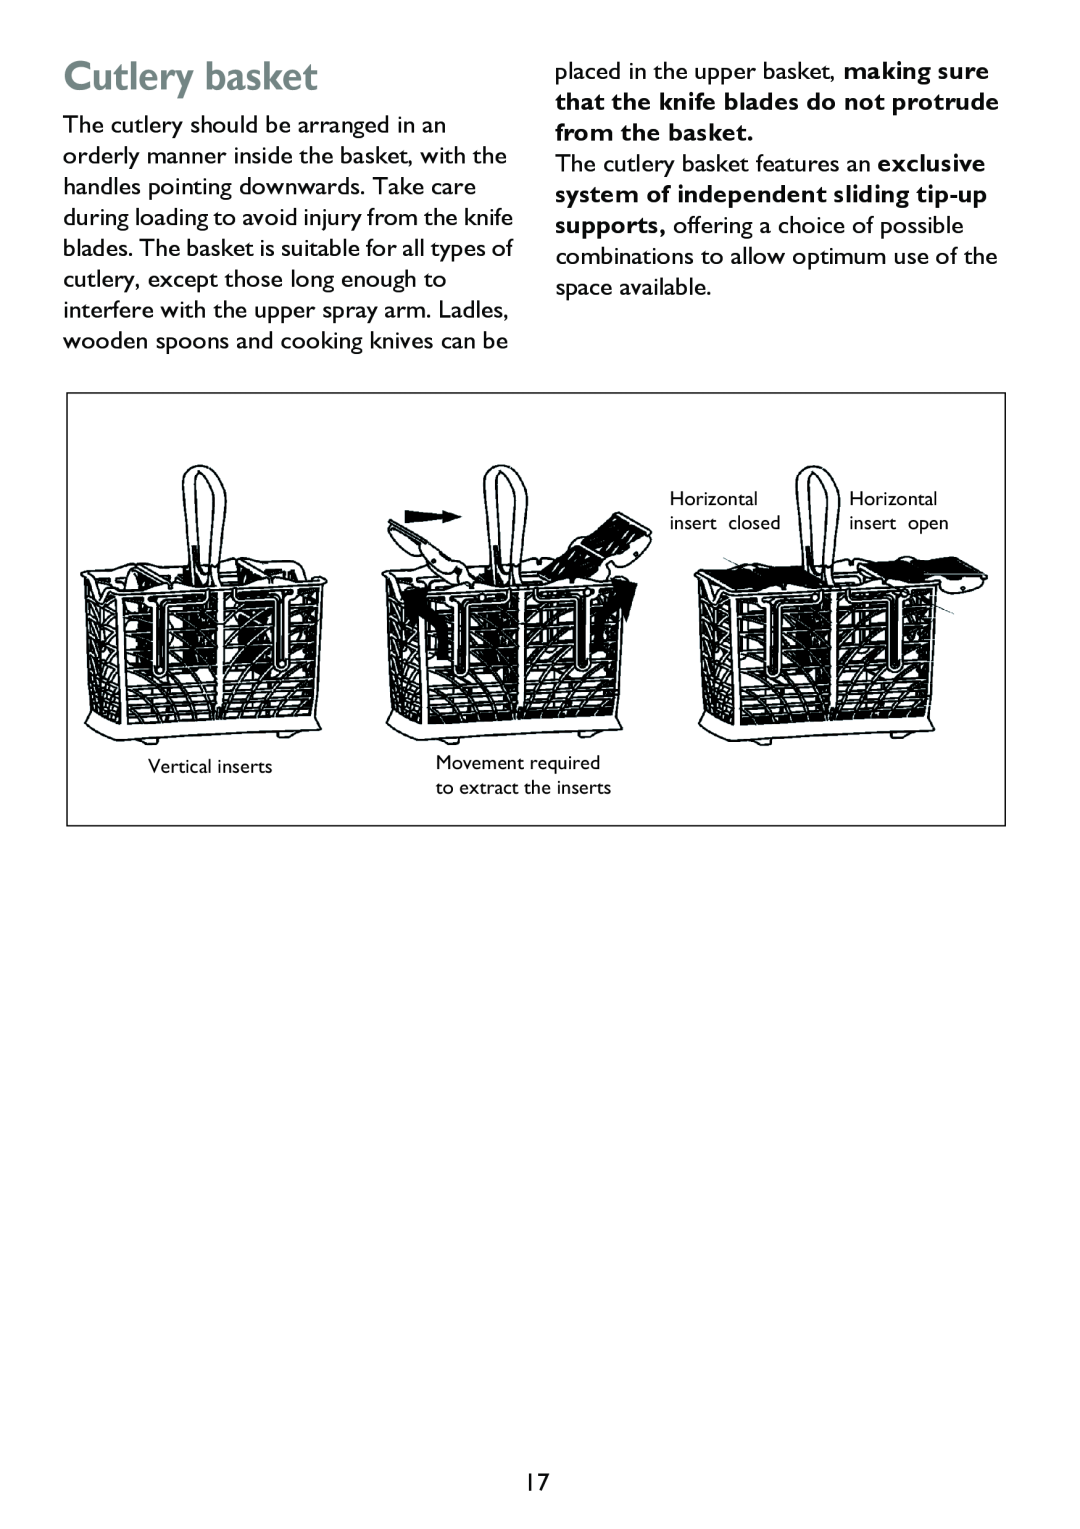 John Lewis JLDWS 907 instruction manual Cutlery basket, that the knife blades do not protrude from the basket 